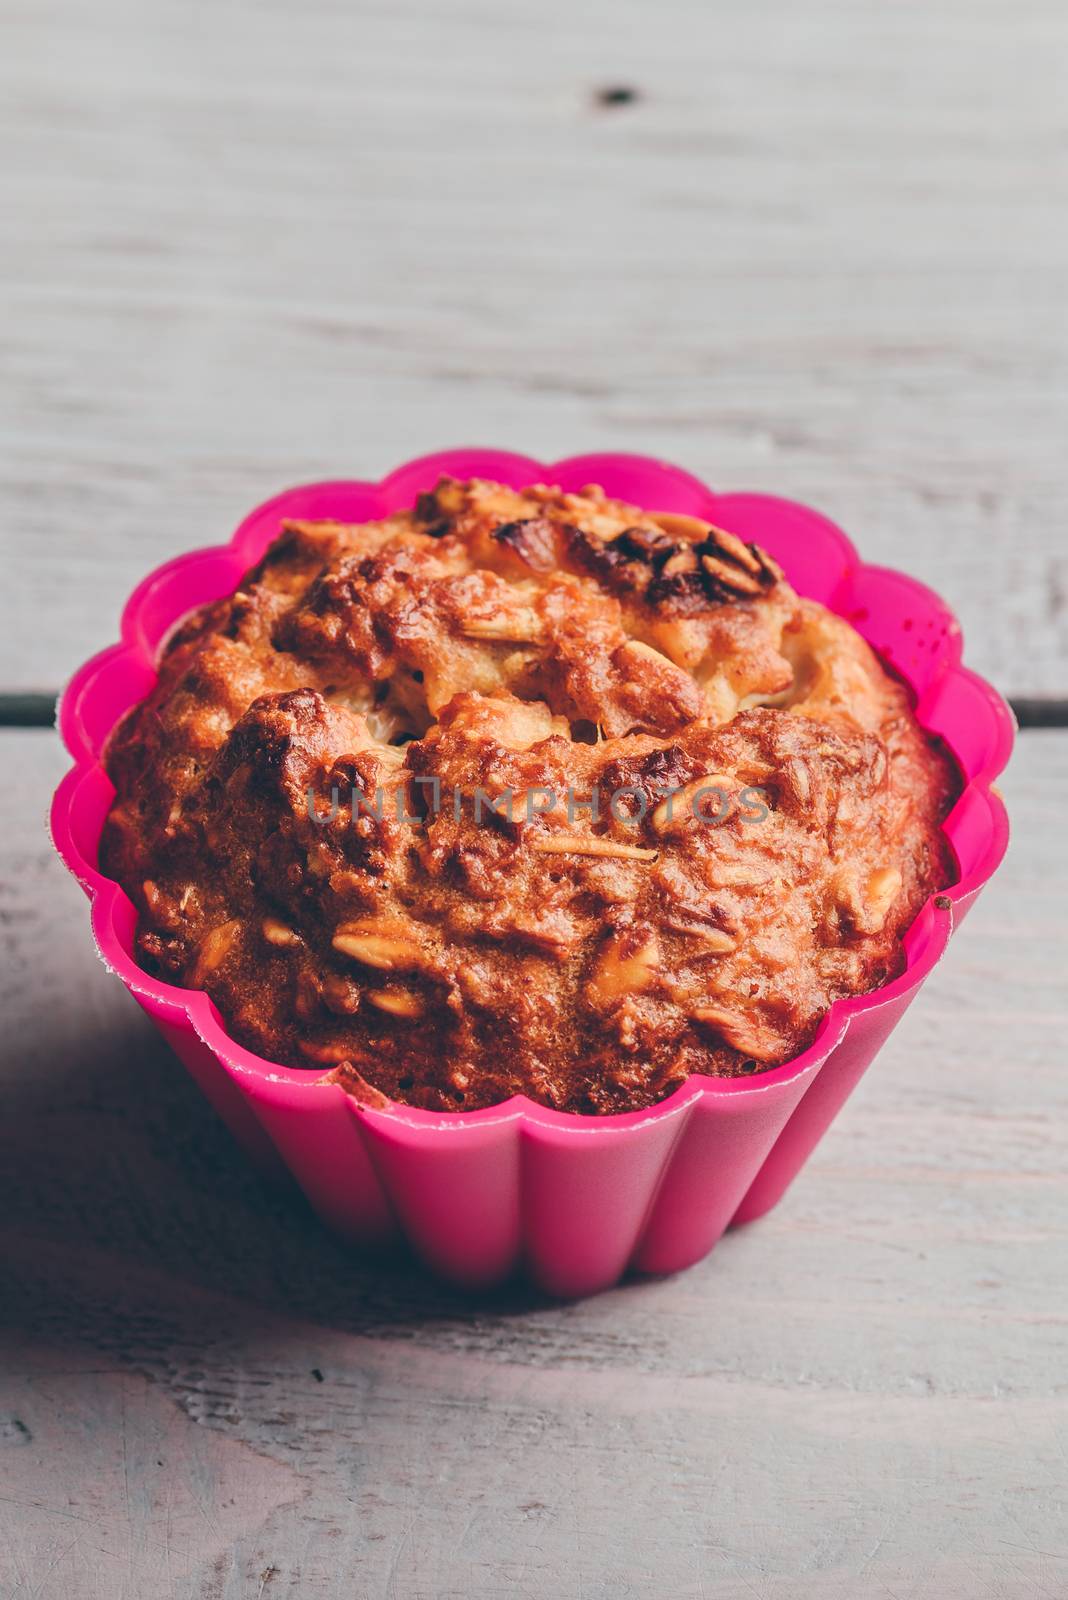 Cooked oatmeal muffin in a pink silicone bakeware over light wooden background.